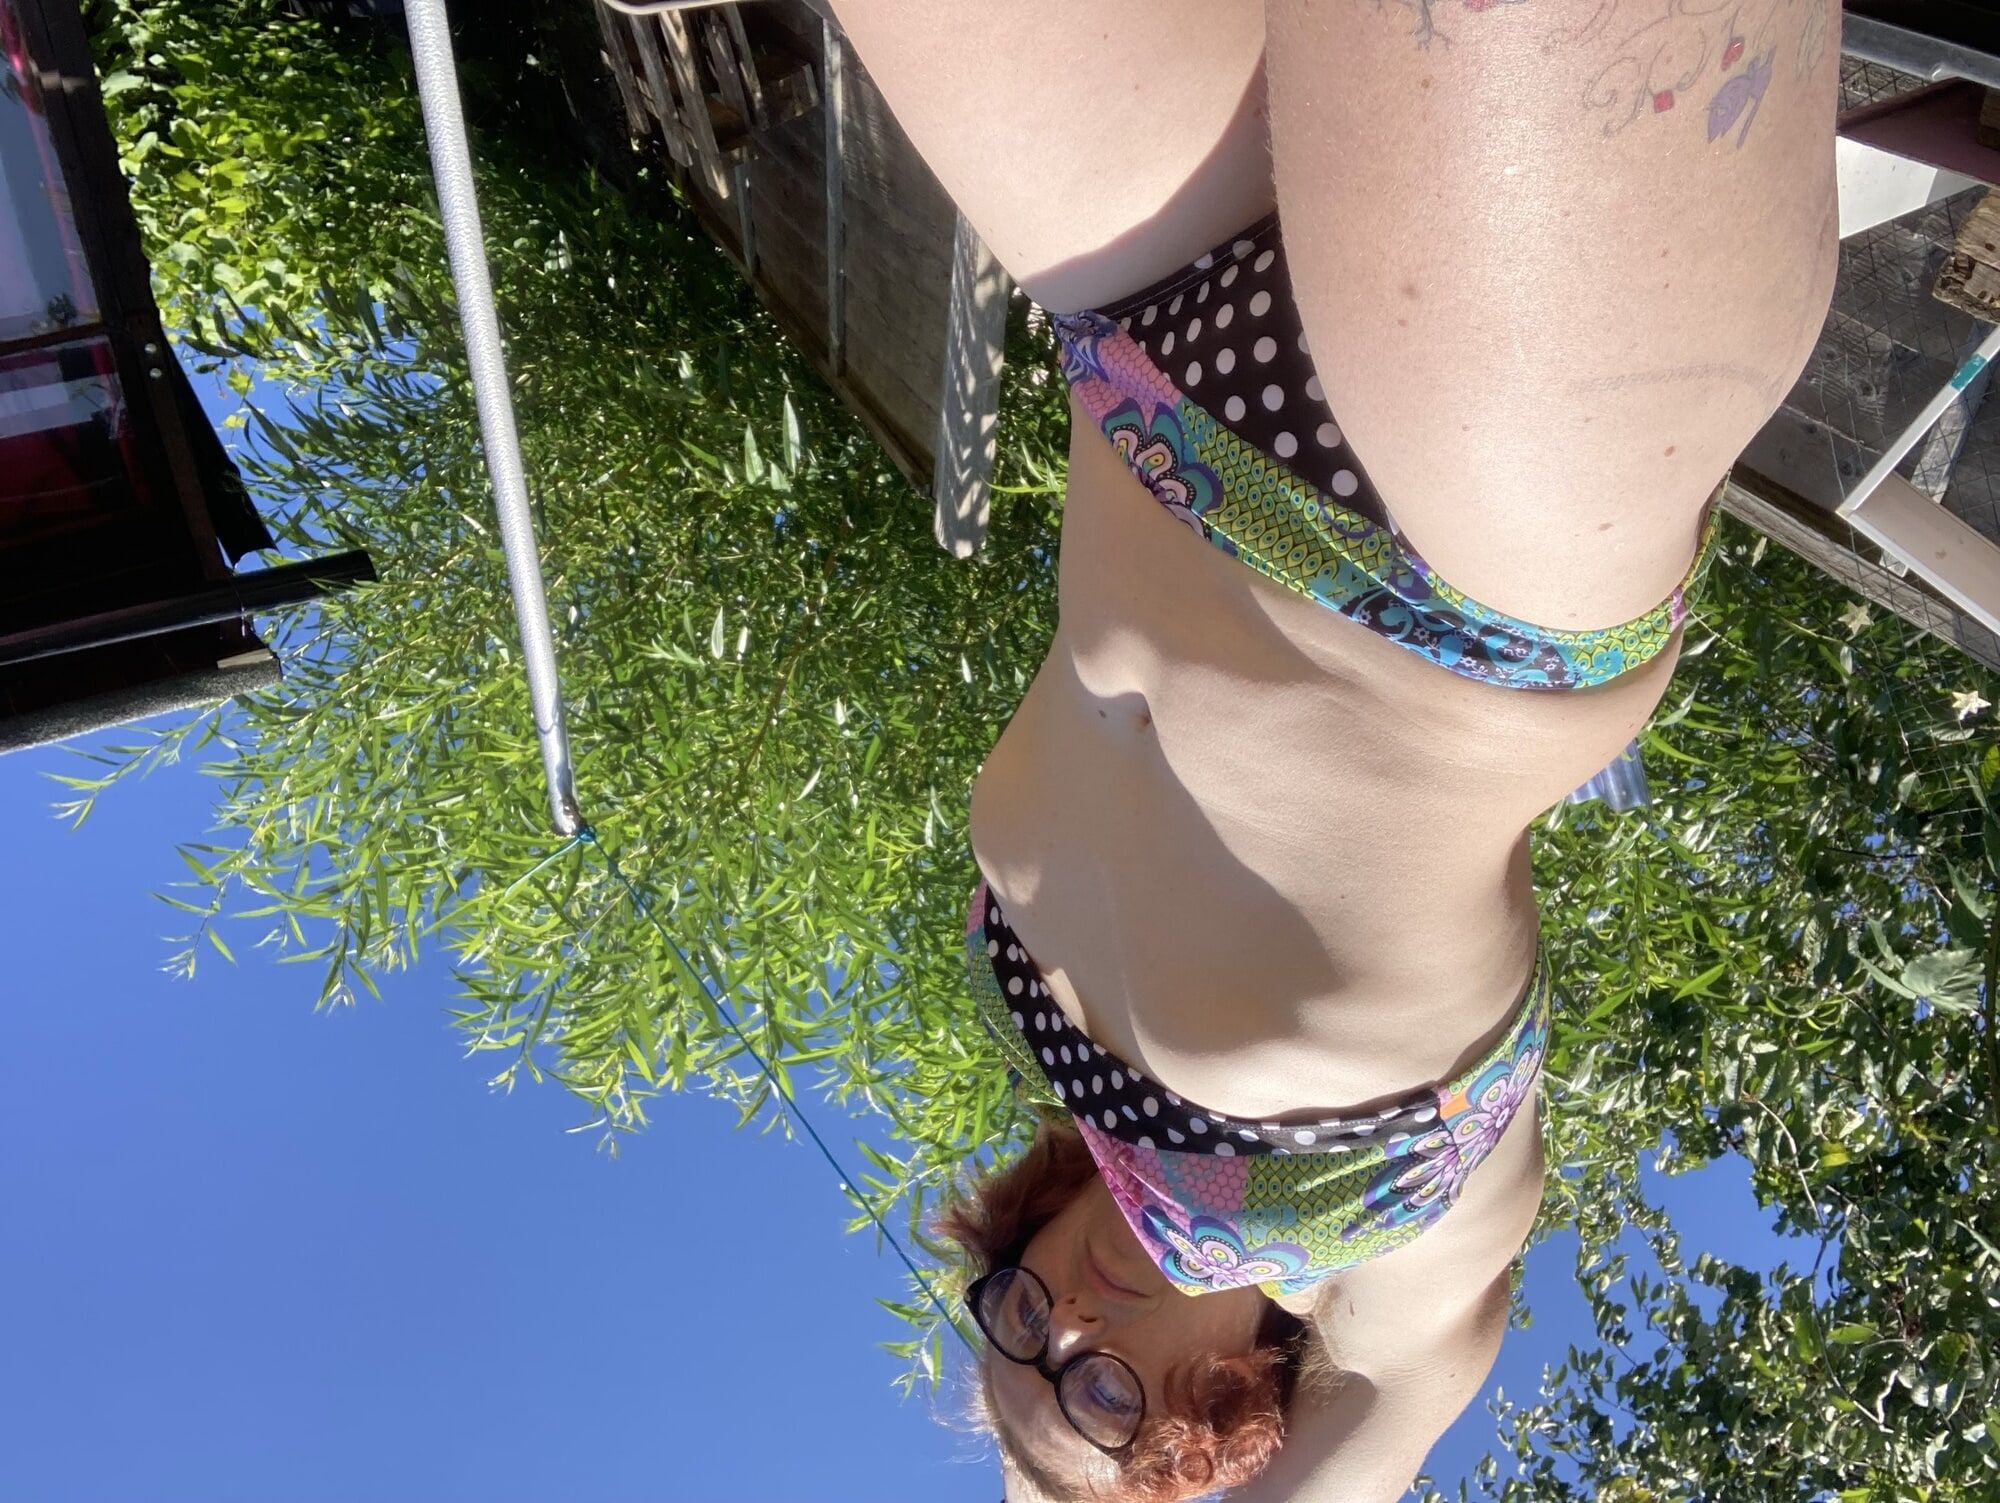 You’re laying in my garden whilst I reach over in a bikini #18